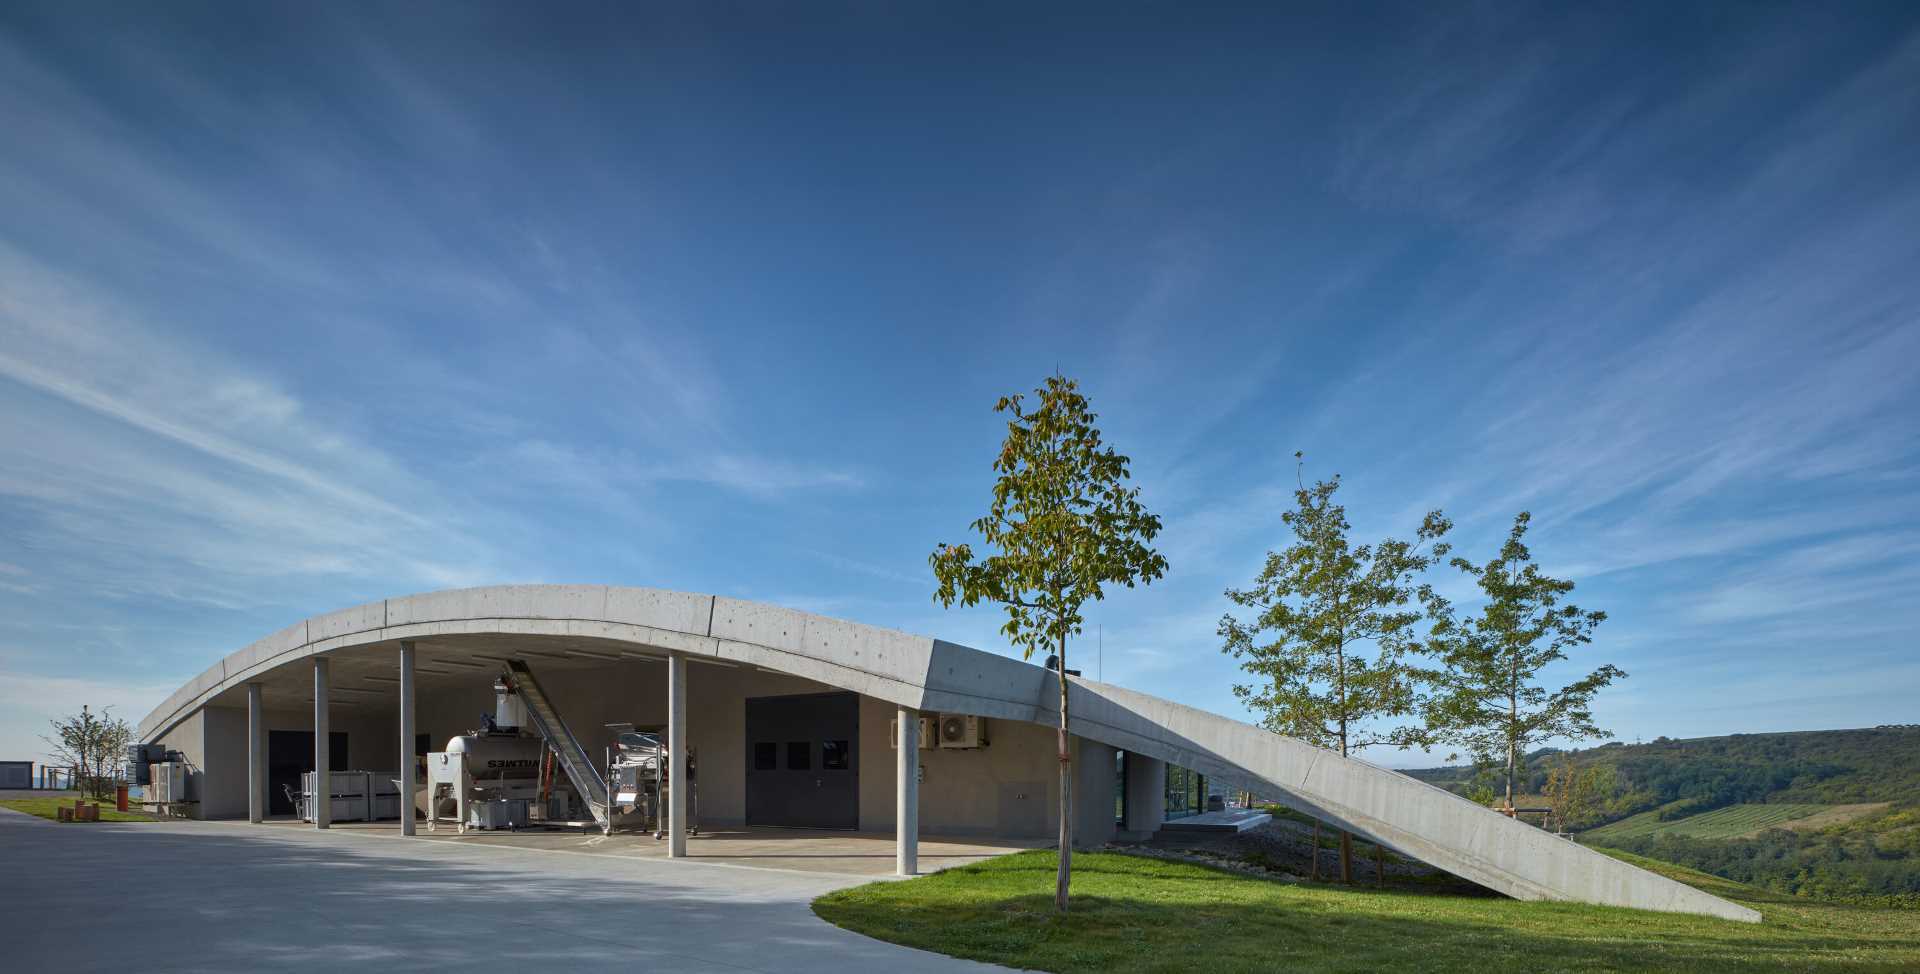 A modern winery that uses exposed concrete, glass, metal, oak, and acacia wood to support the organic form of the building.